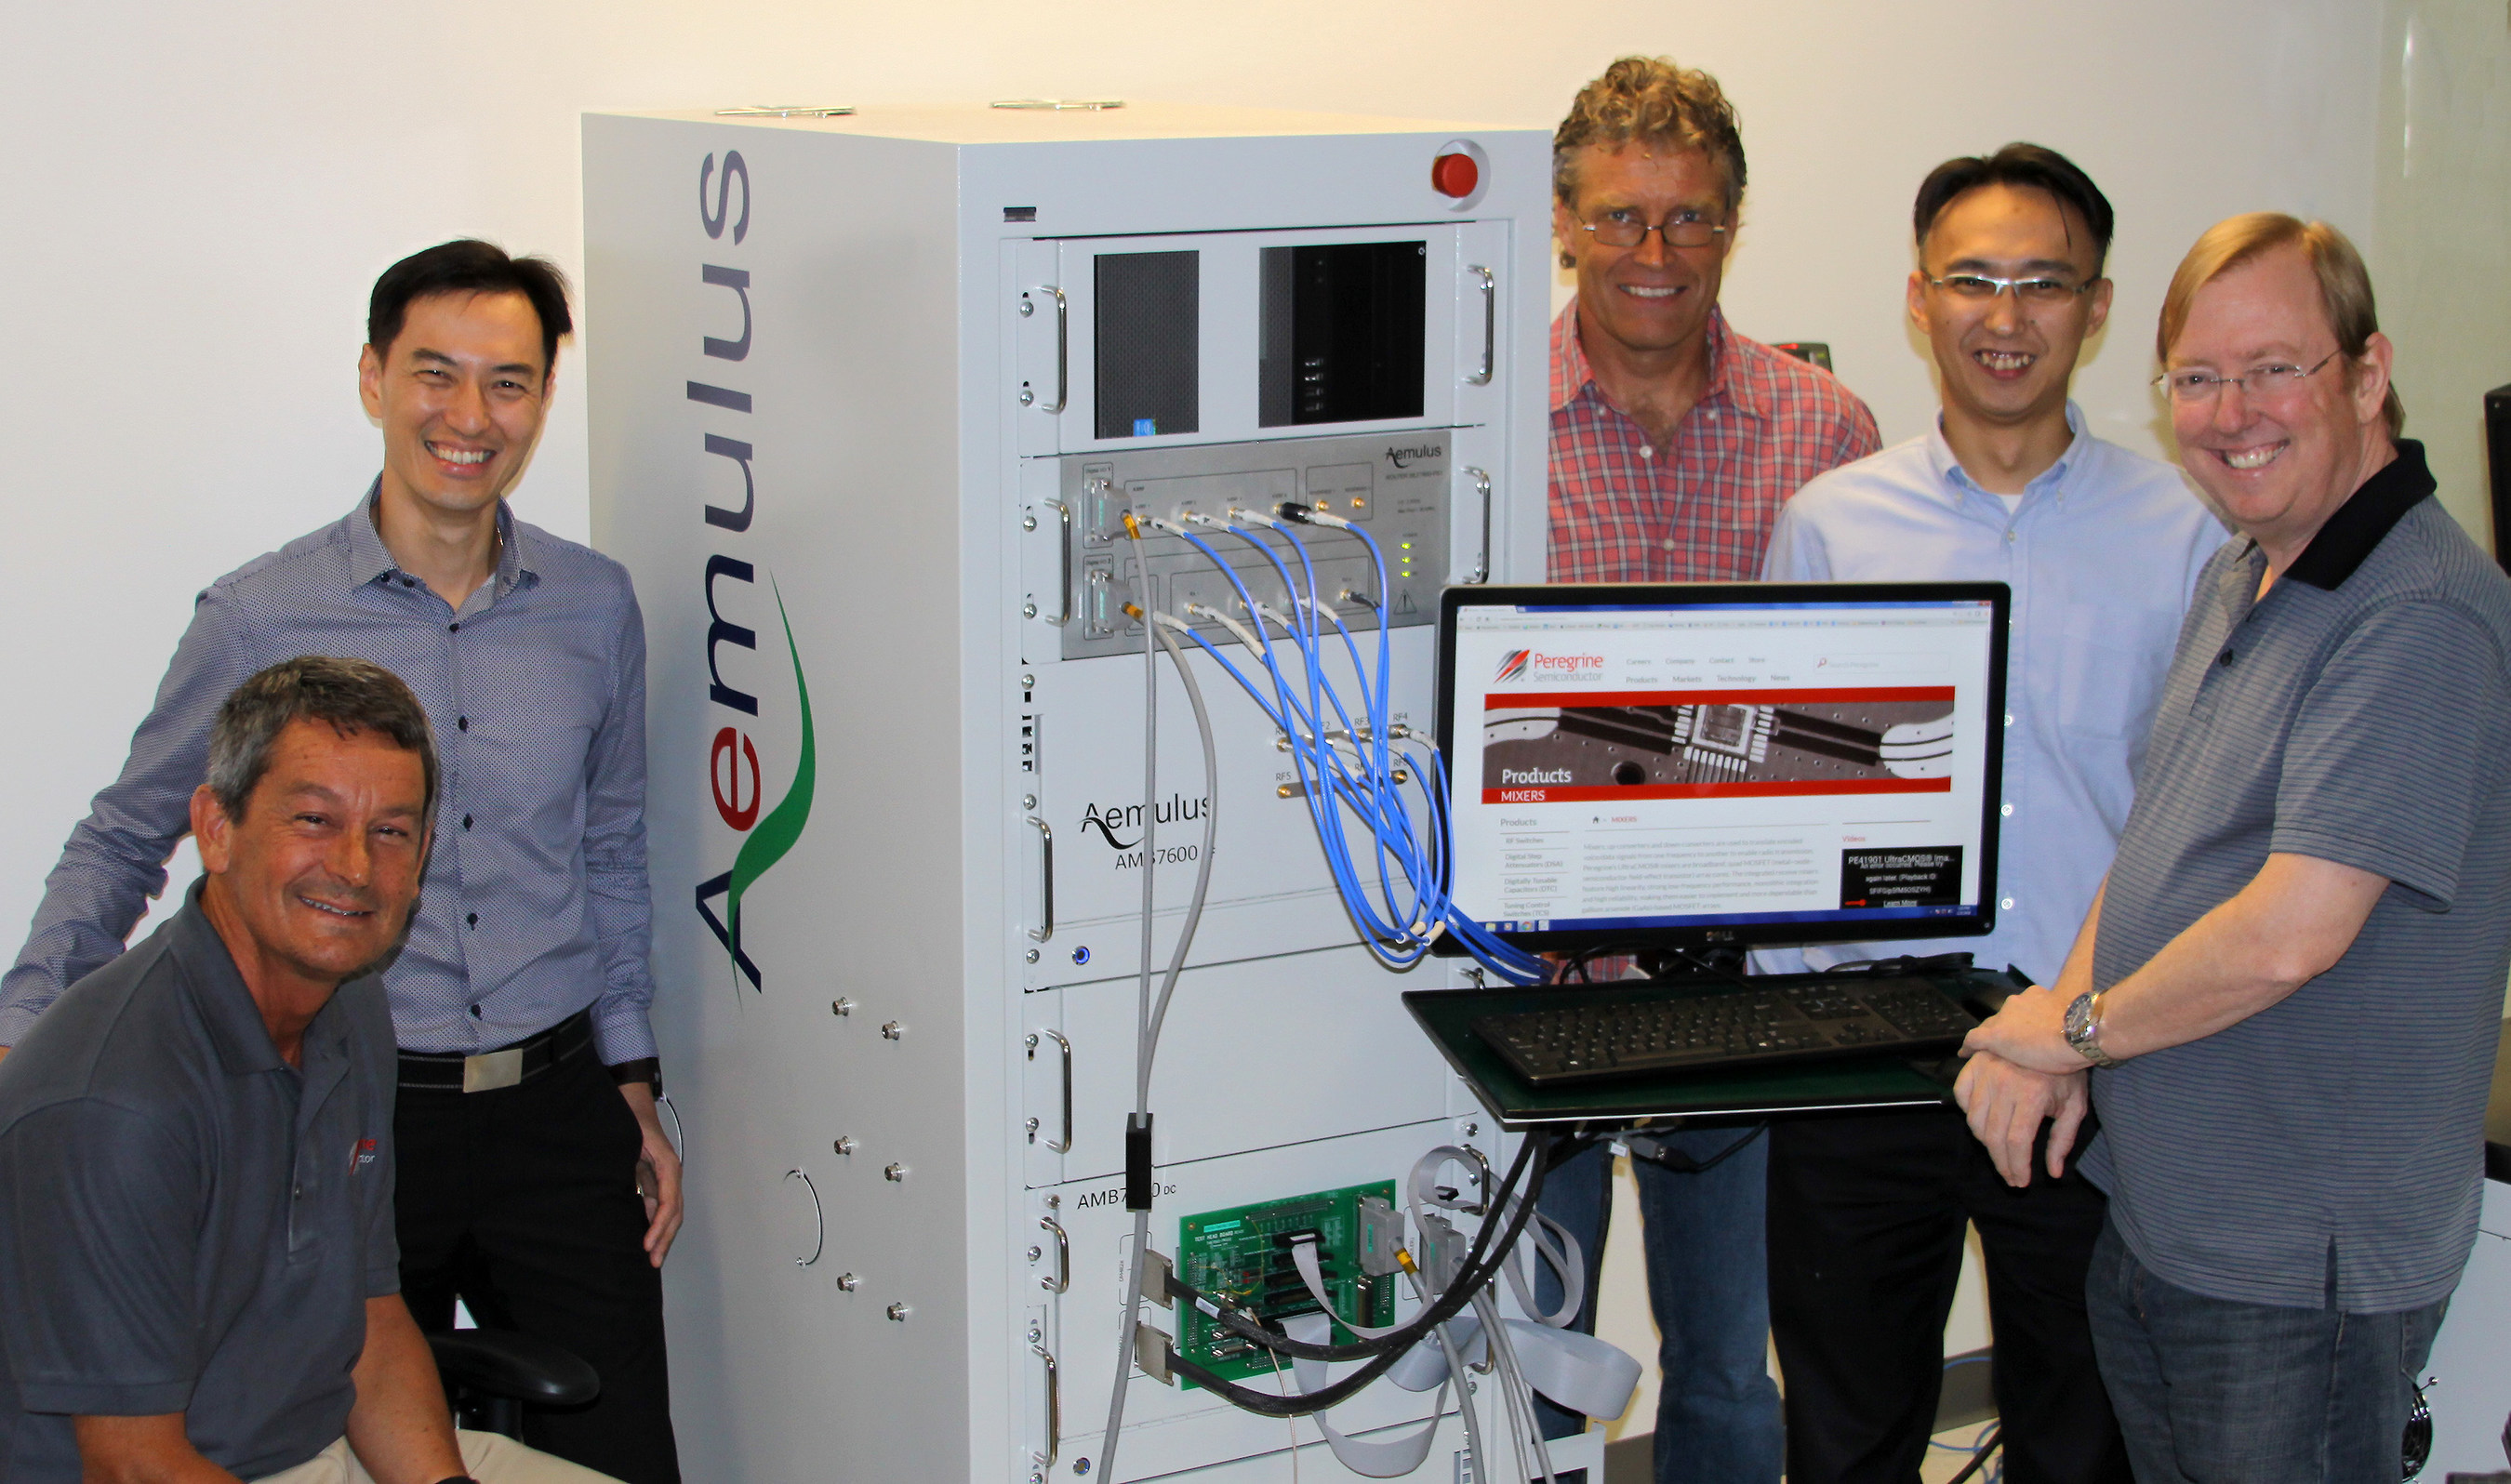 Aemulus and Peregrine Semiconductor collaborate on the development of a new microwave frequency tester. Pictured from left to right: Jim Cable, CEO of Peregrine Semiconductor; Sang Beng Ng, CEO of Aemulus; Carl Tulberg, principal engineer, NPI operations at Peregrine; E Chiang Tan, senior marketing director at Aemulus; and Jeff Bartlett, manager, production test development at Peregrine.